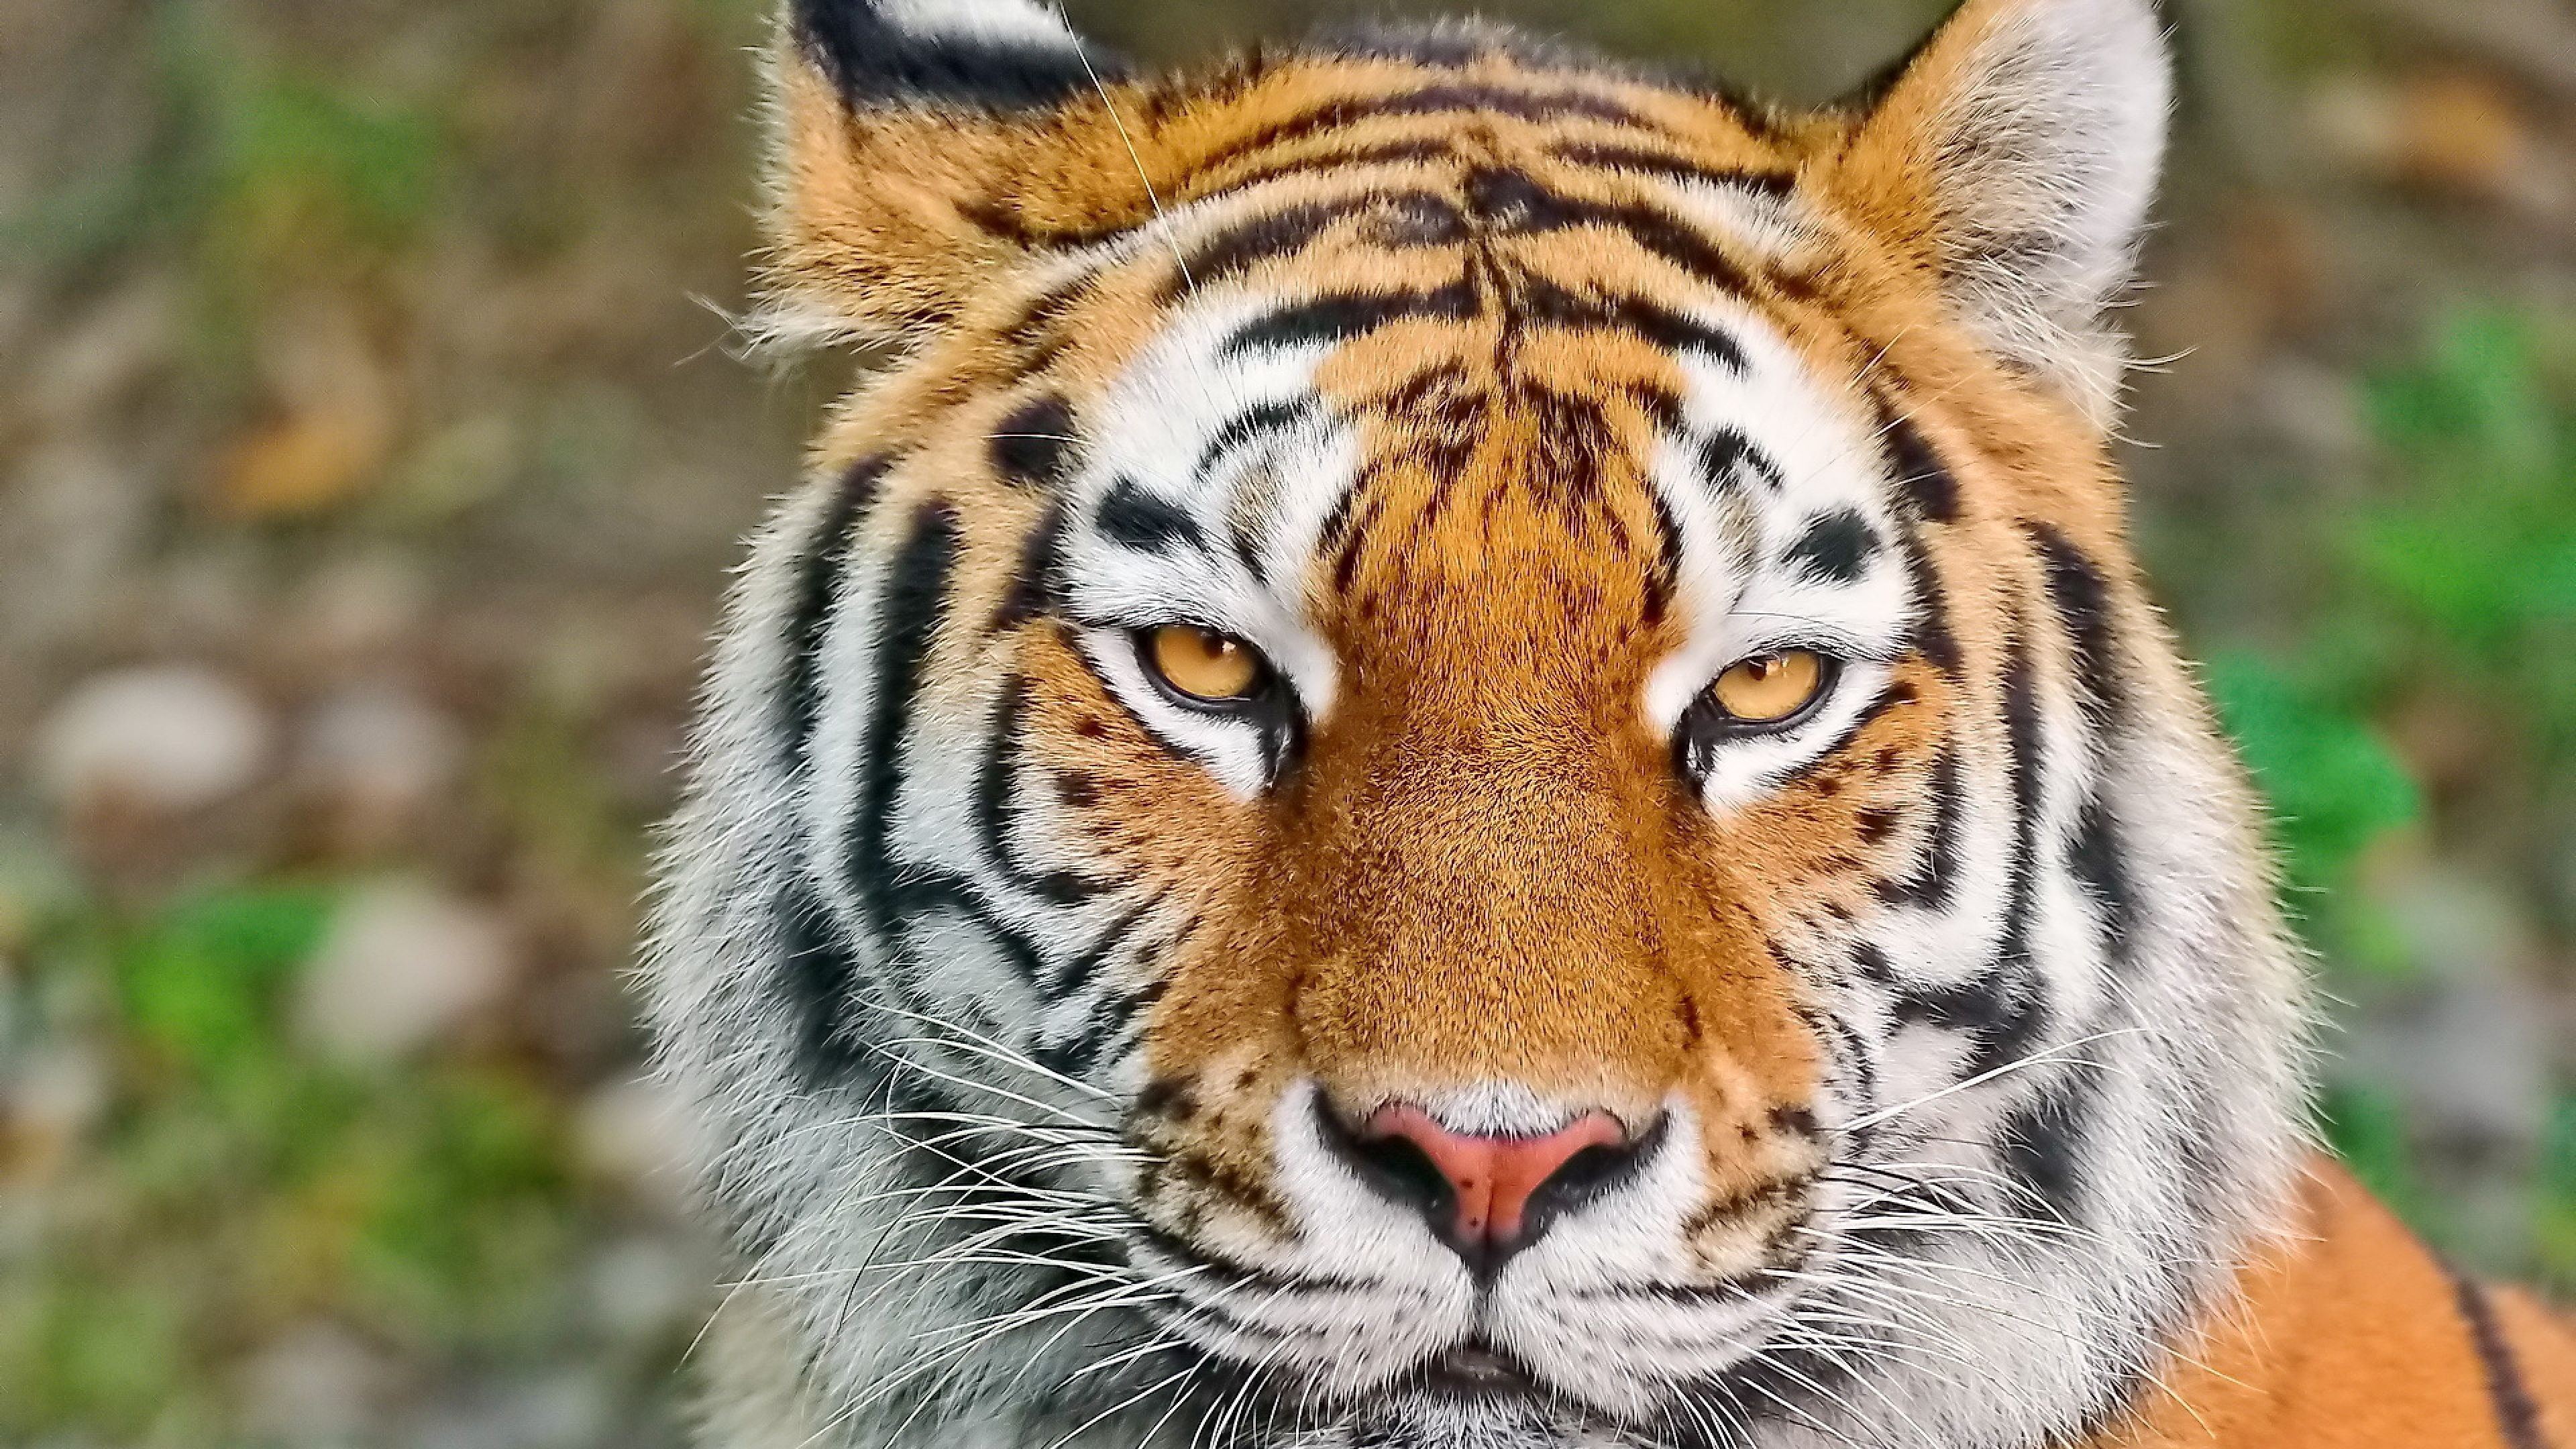 Download Wallpaper 3840x2160 Tiger, Face, Eyes, Aggression